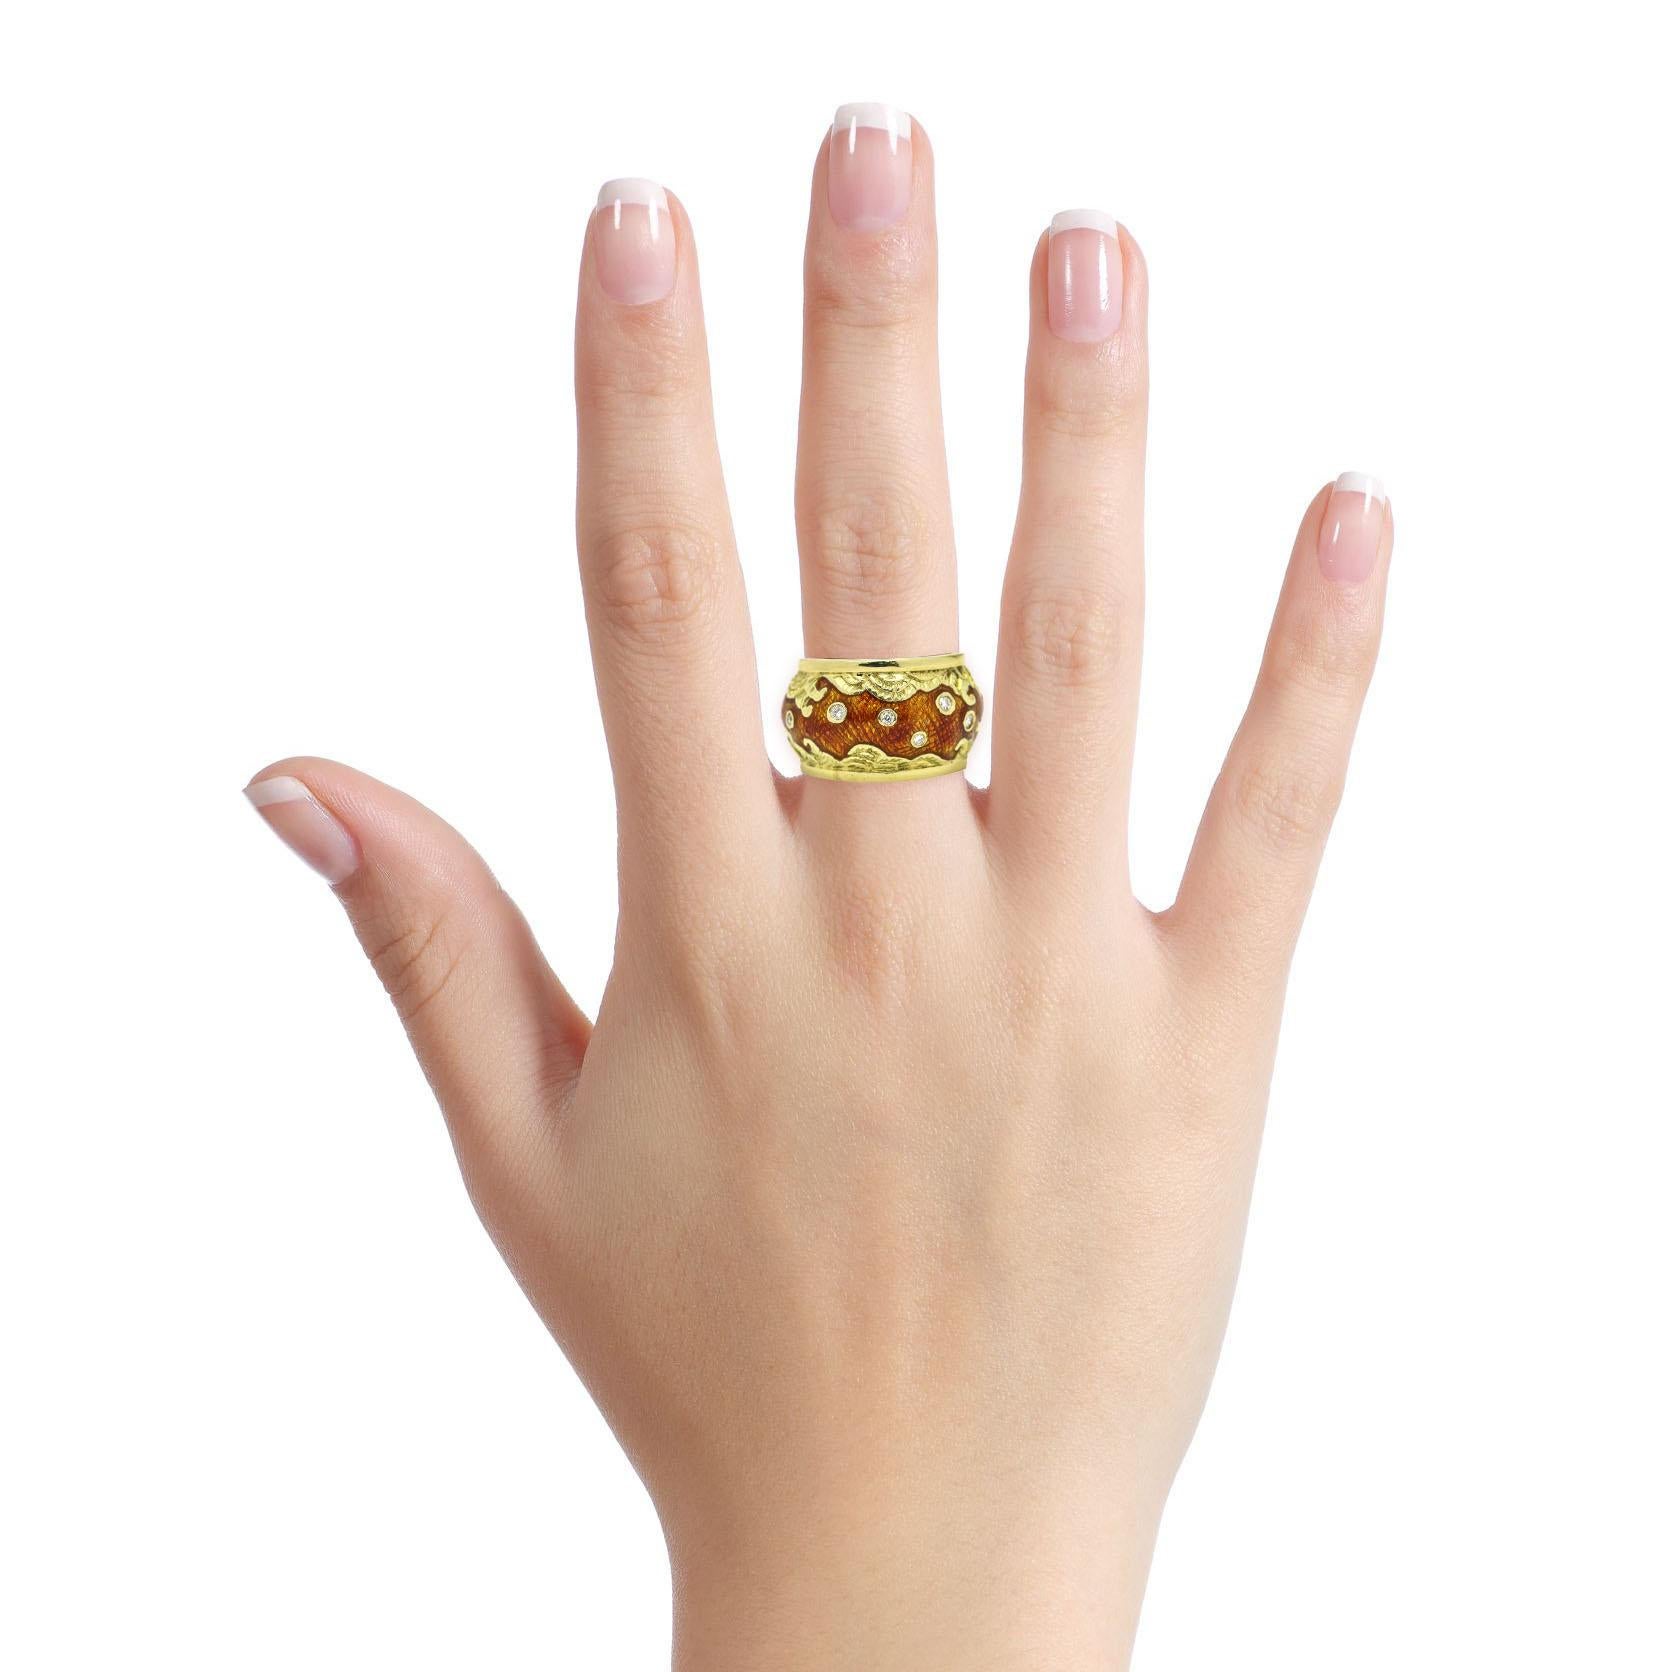 D shaped wide band ring in 18-karat yellow gold with diamonds and enamel. Textured gold wave design with orange enamel detail, and bezel set diamonds.

Size, 6
Diamond Total Carat Weight, .25 carat